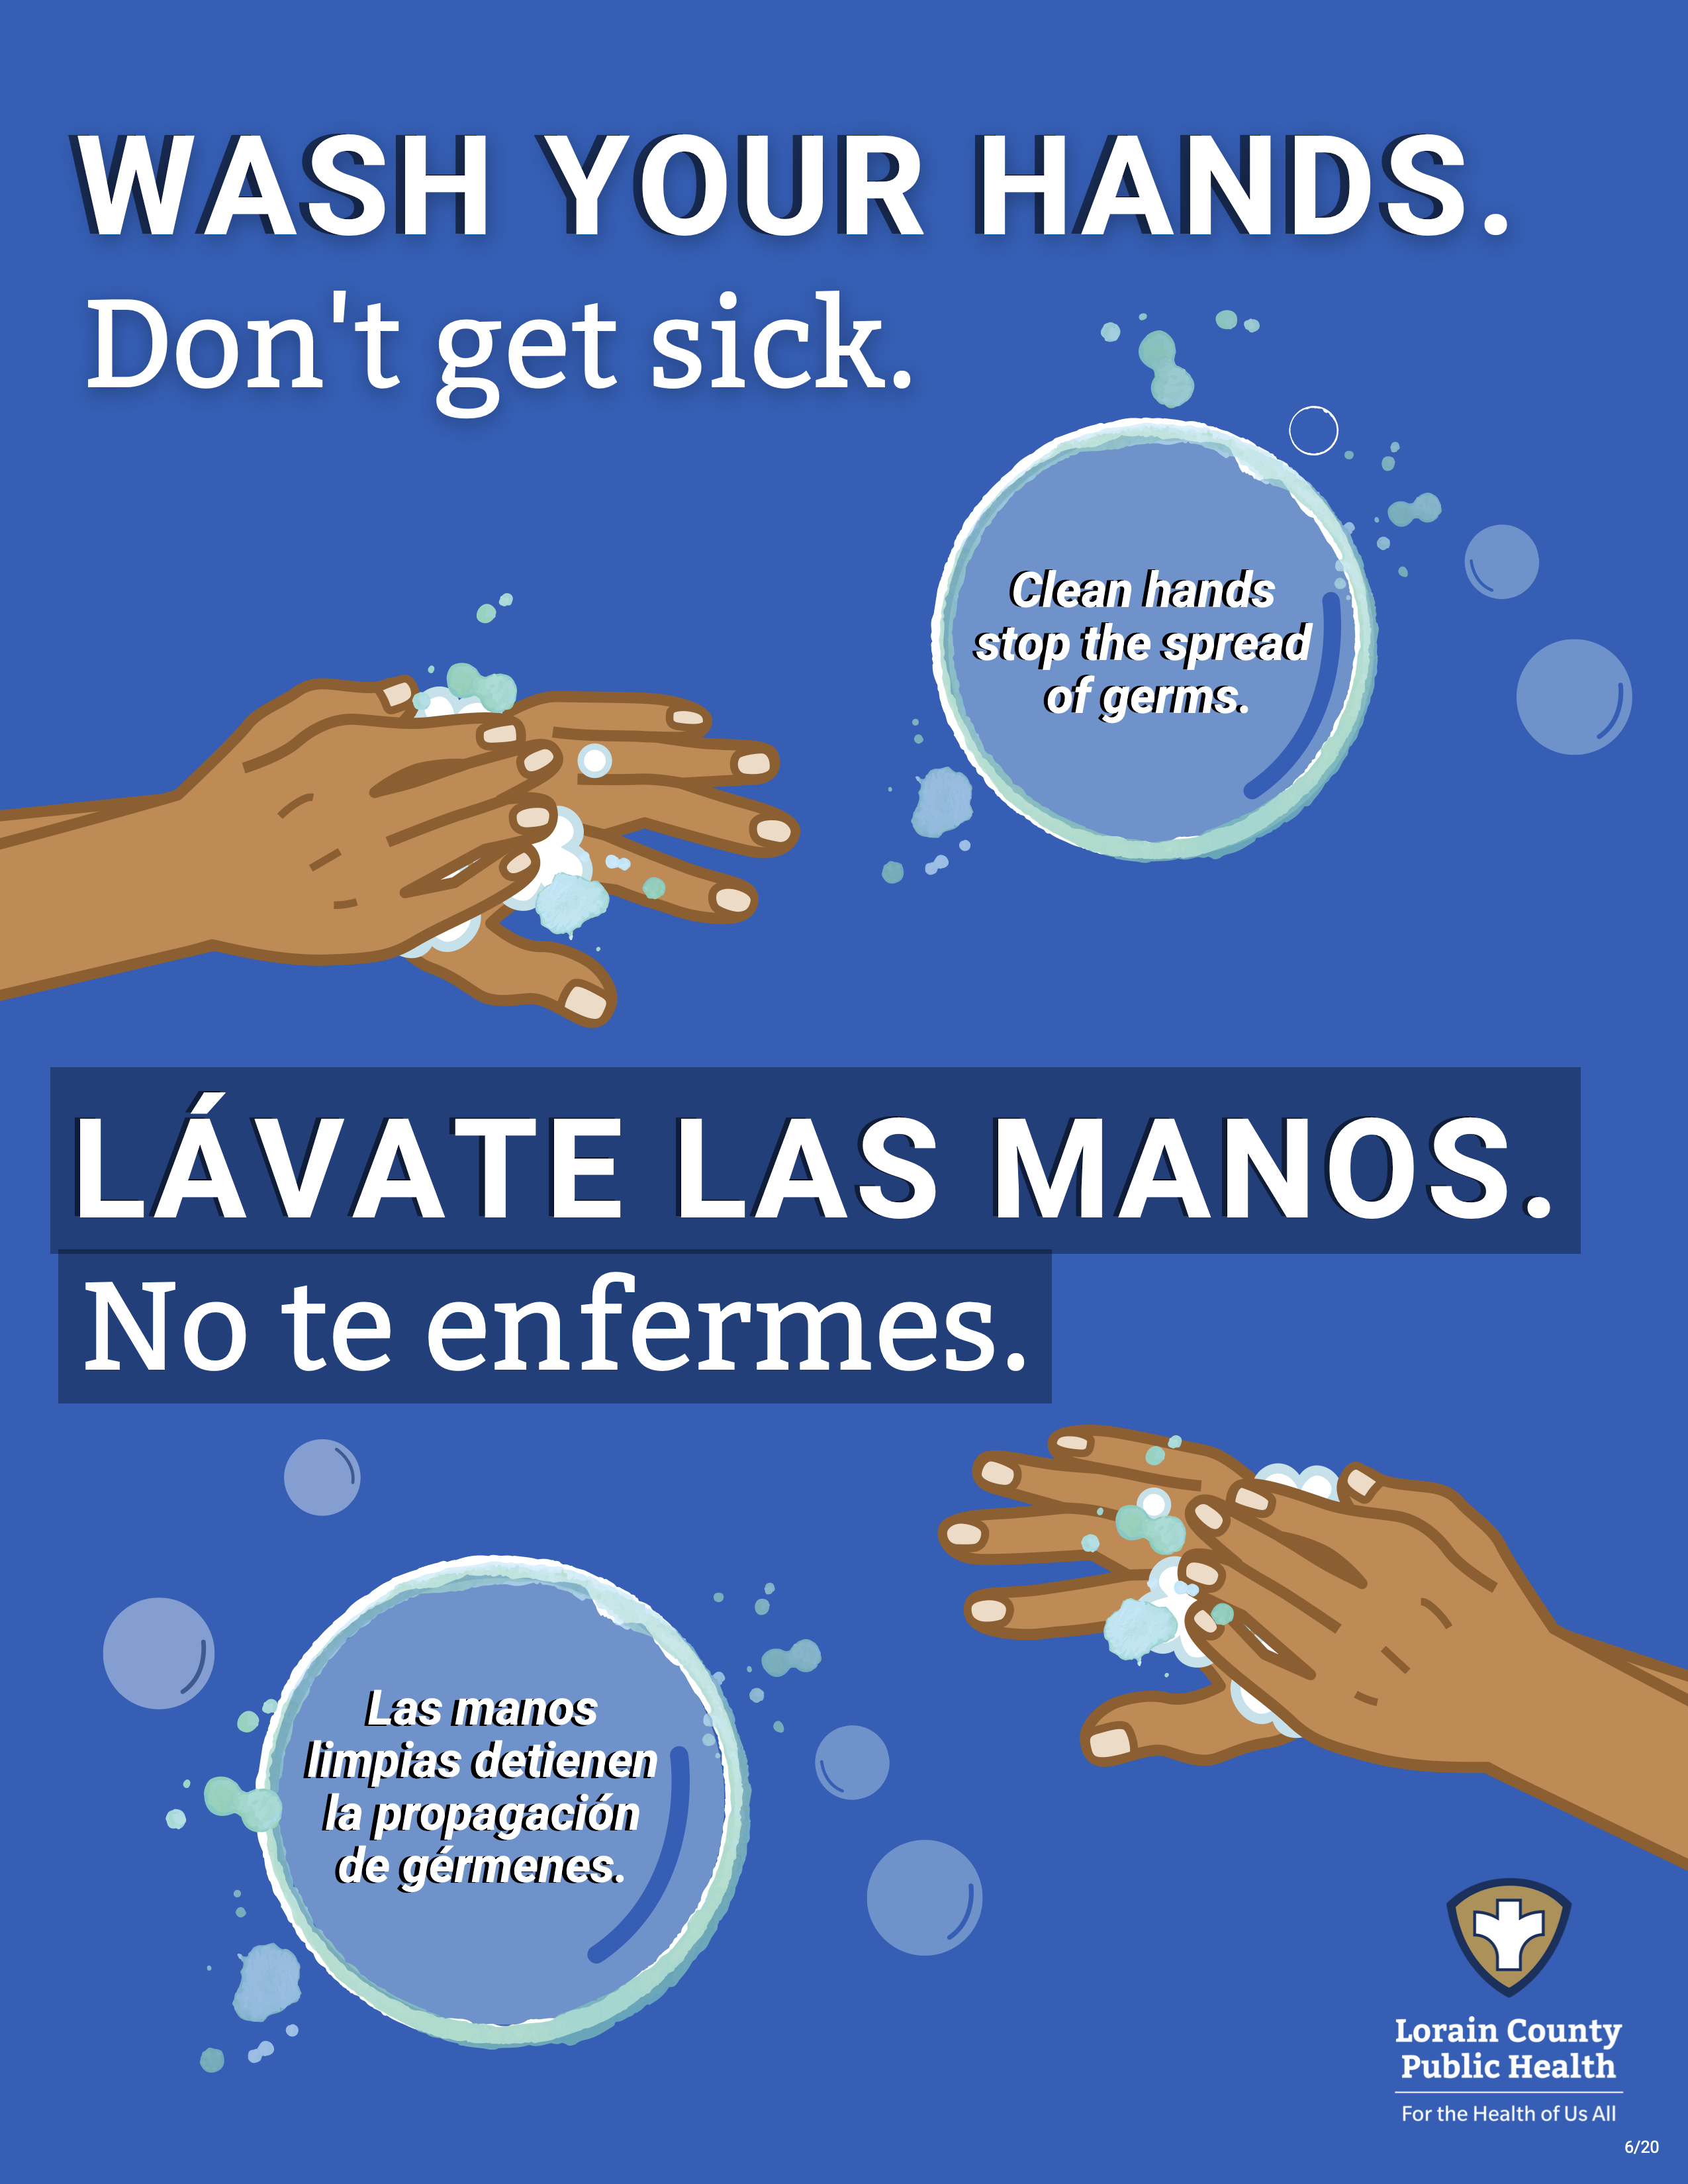 Hand-washing to avoid germs, illness - Mayo Clinic Health System